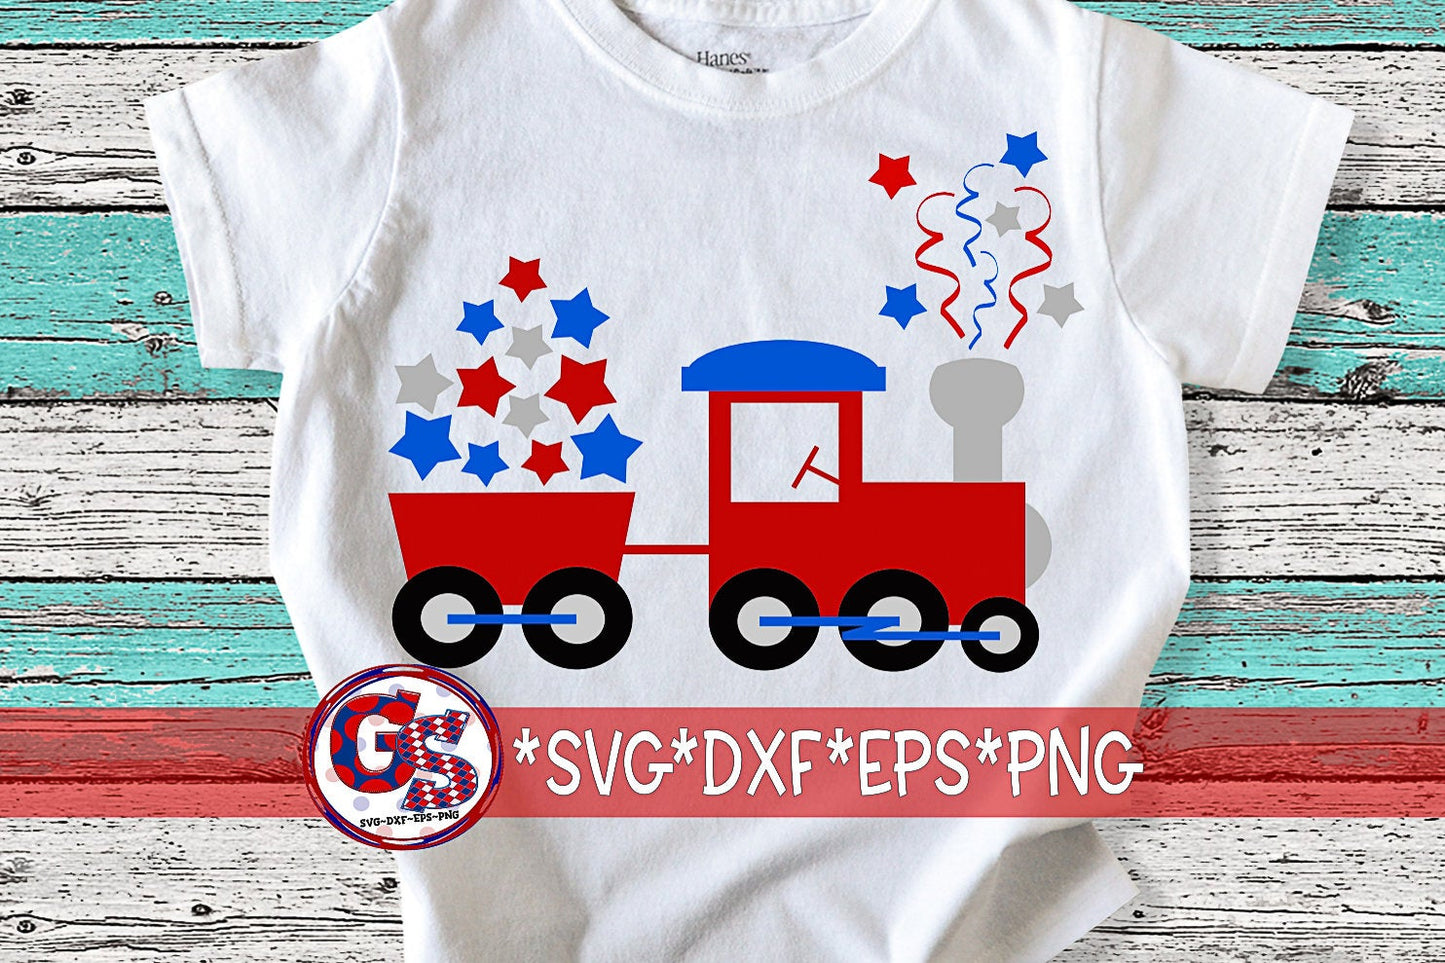 American Train | Red White & Blue Train | July 4th svg dxf eps png. Train SVG | Memorial Day SVG | July 4th Train SvG |Instant Download File